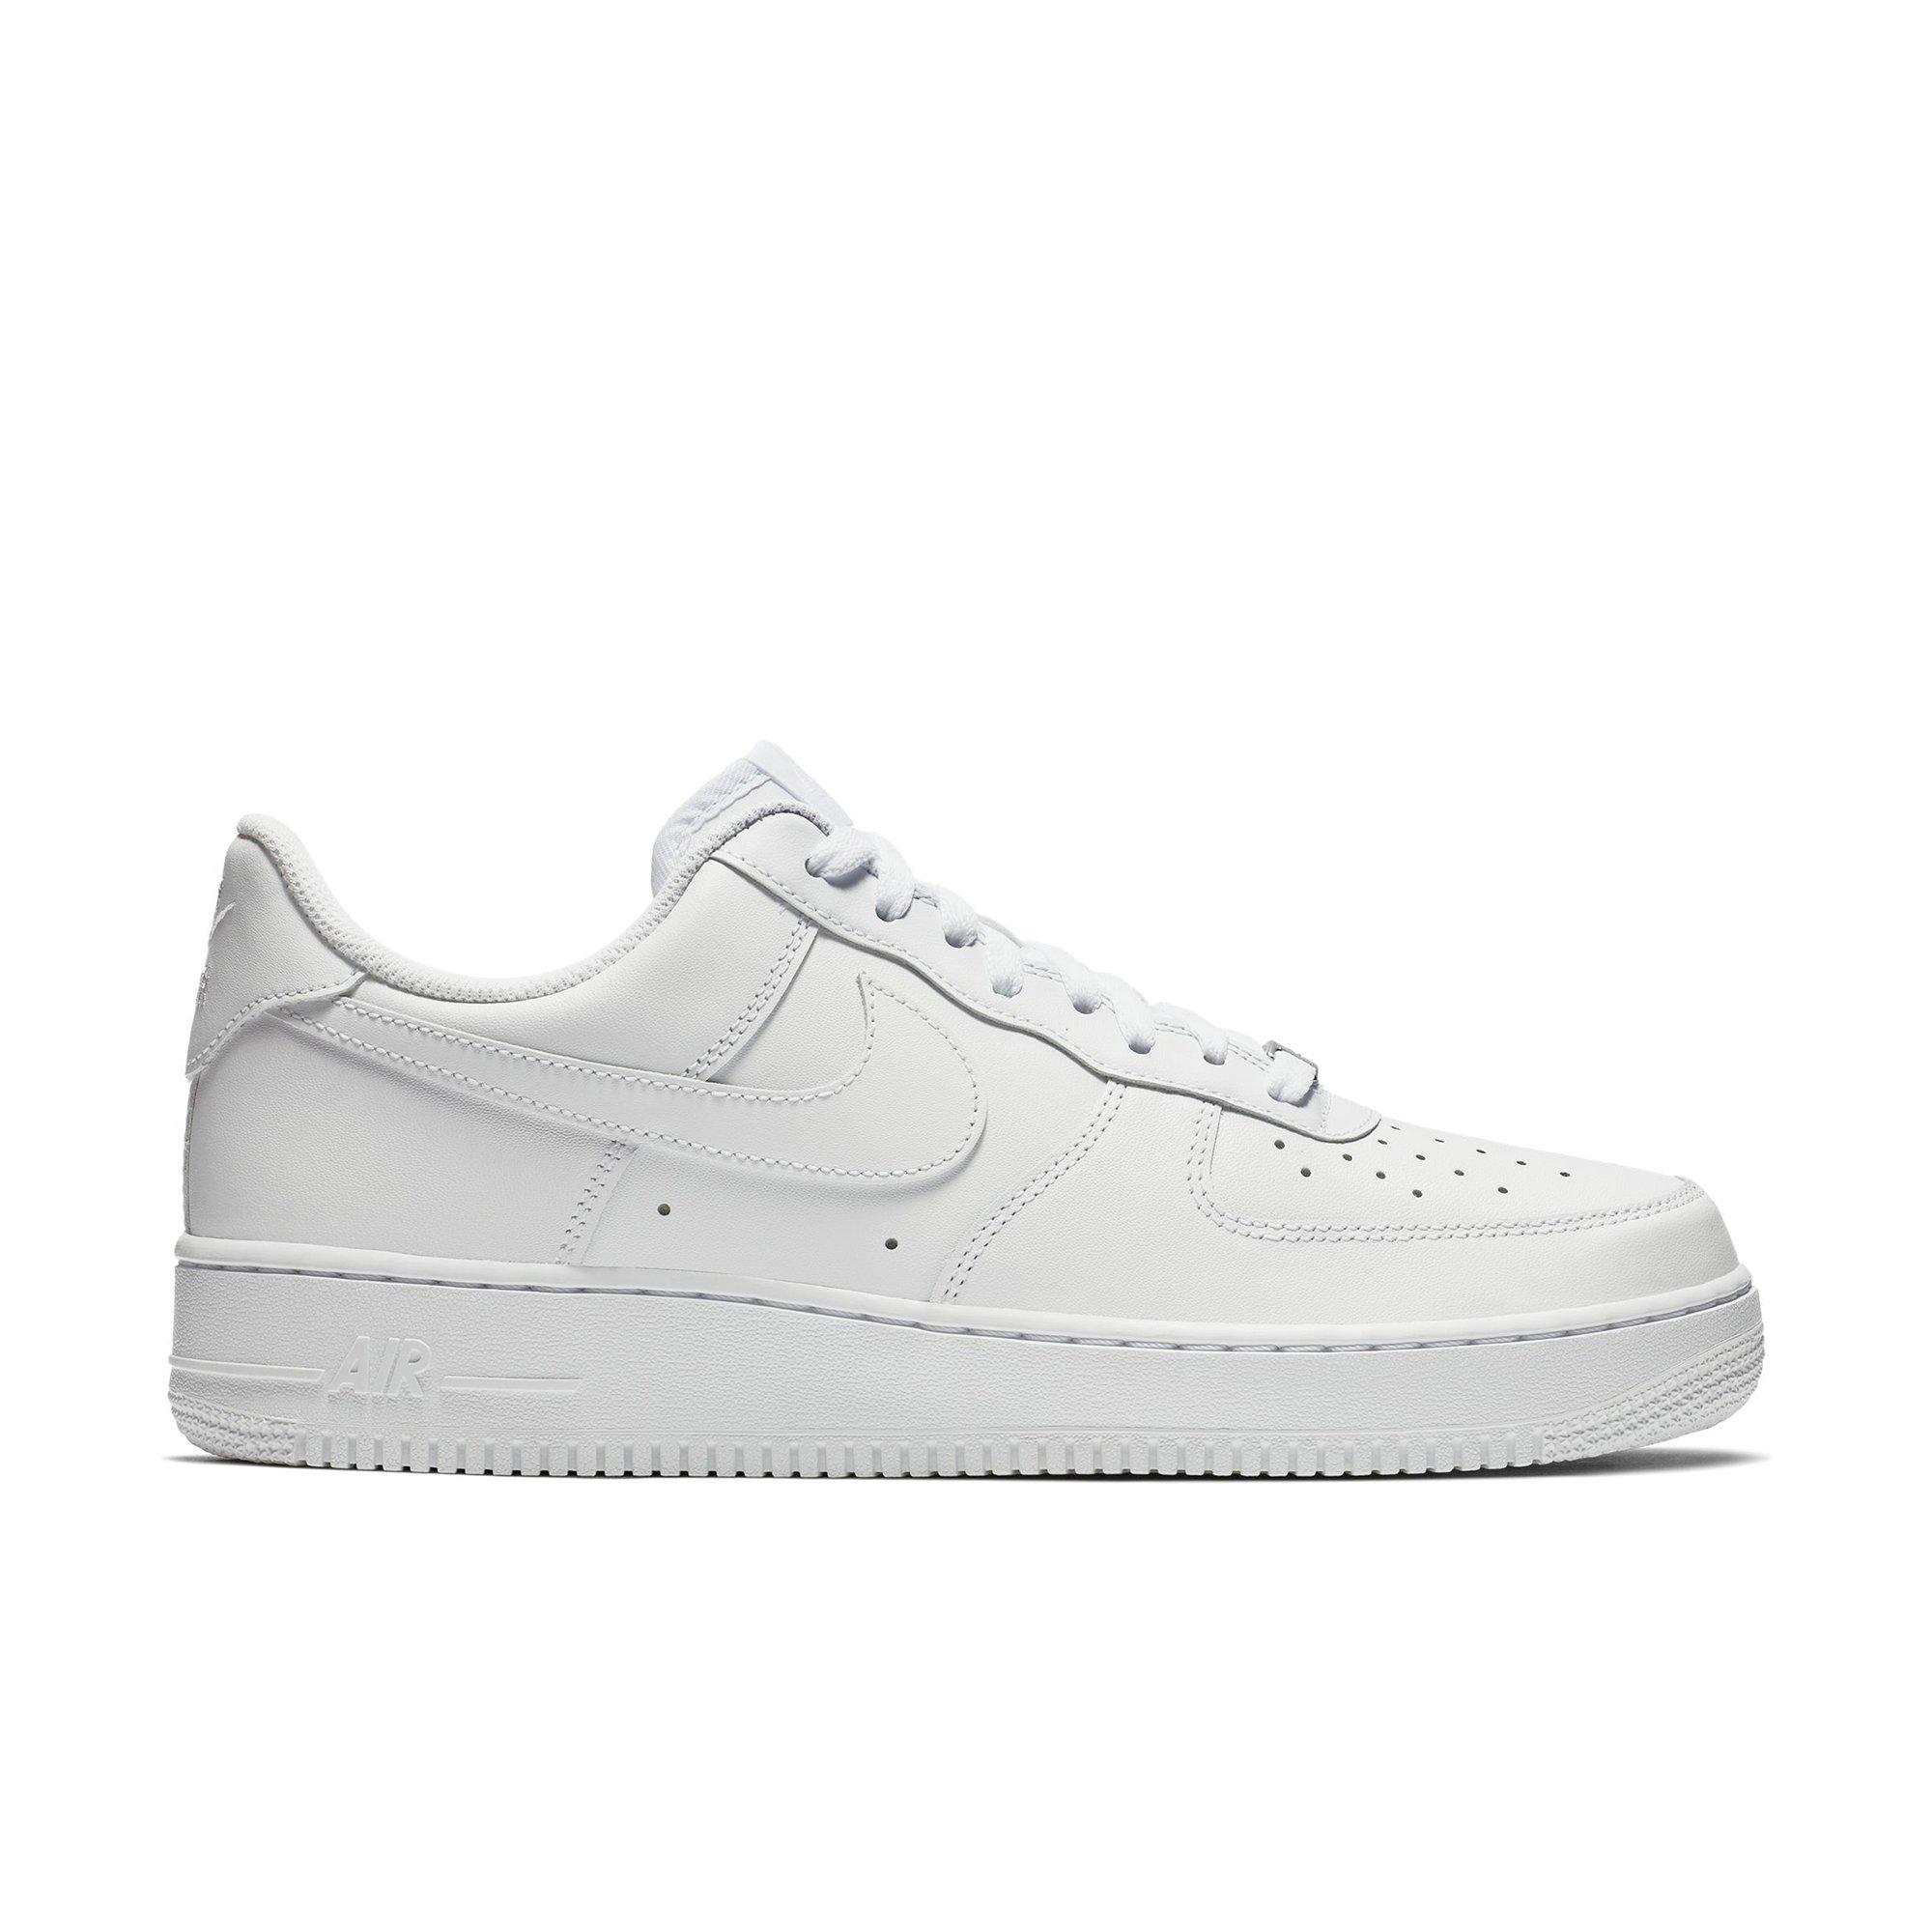 High Top Nike Air Force 1 Shoes - Free Shipping & Returns 